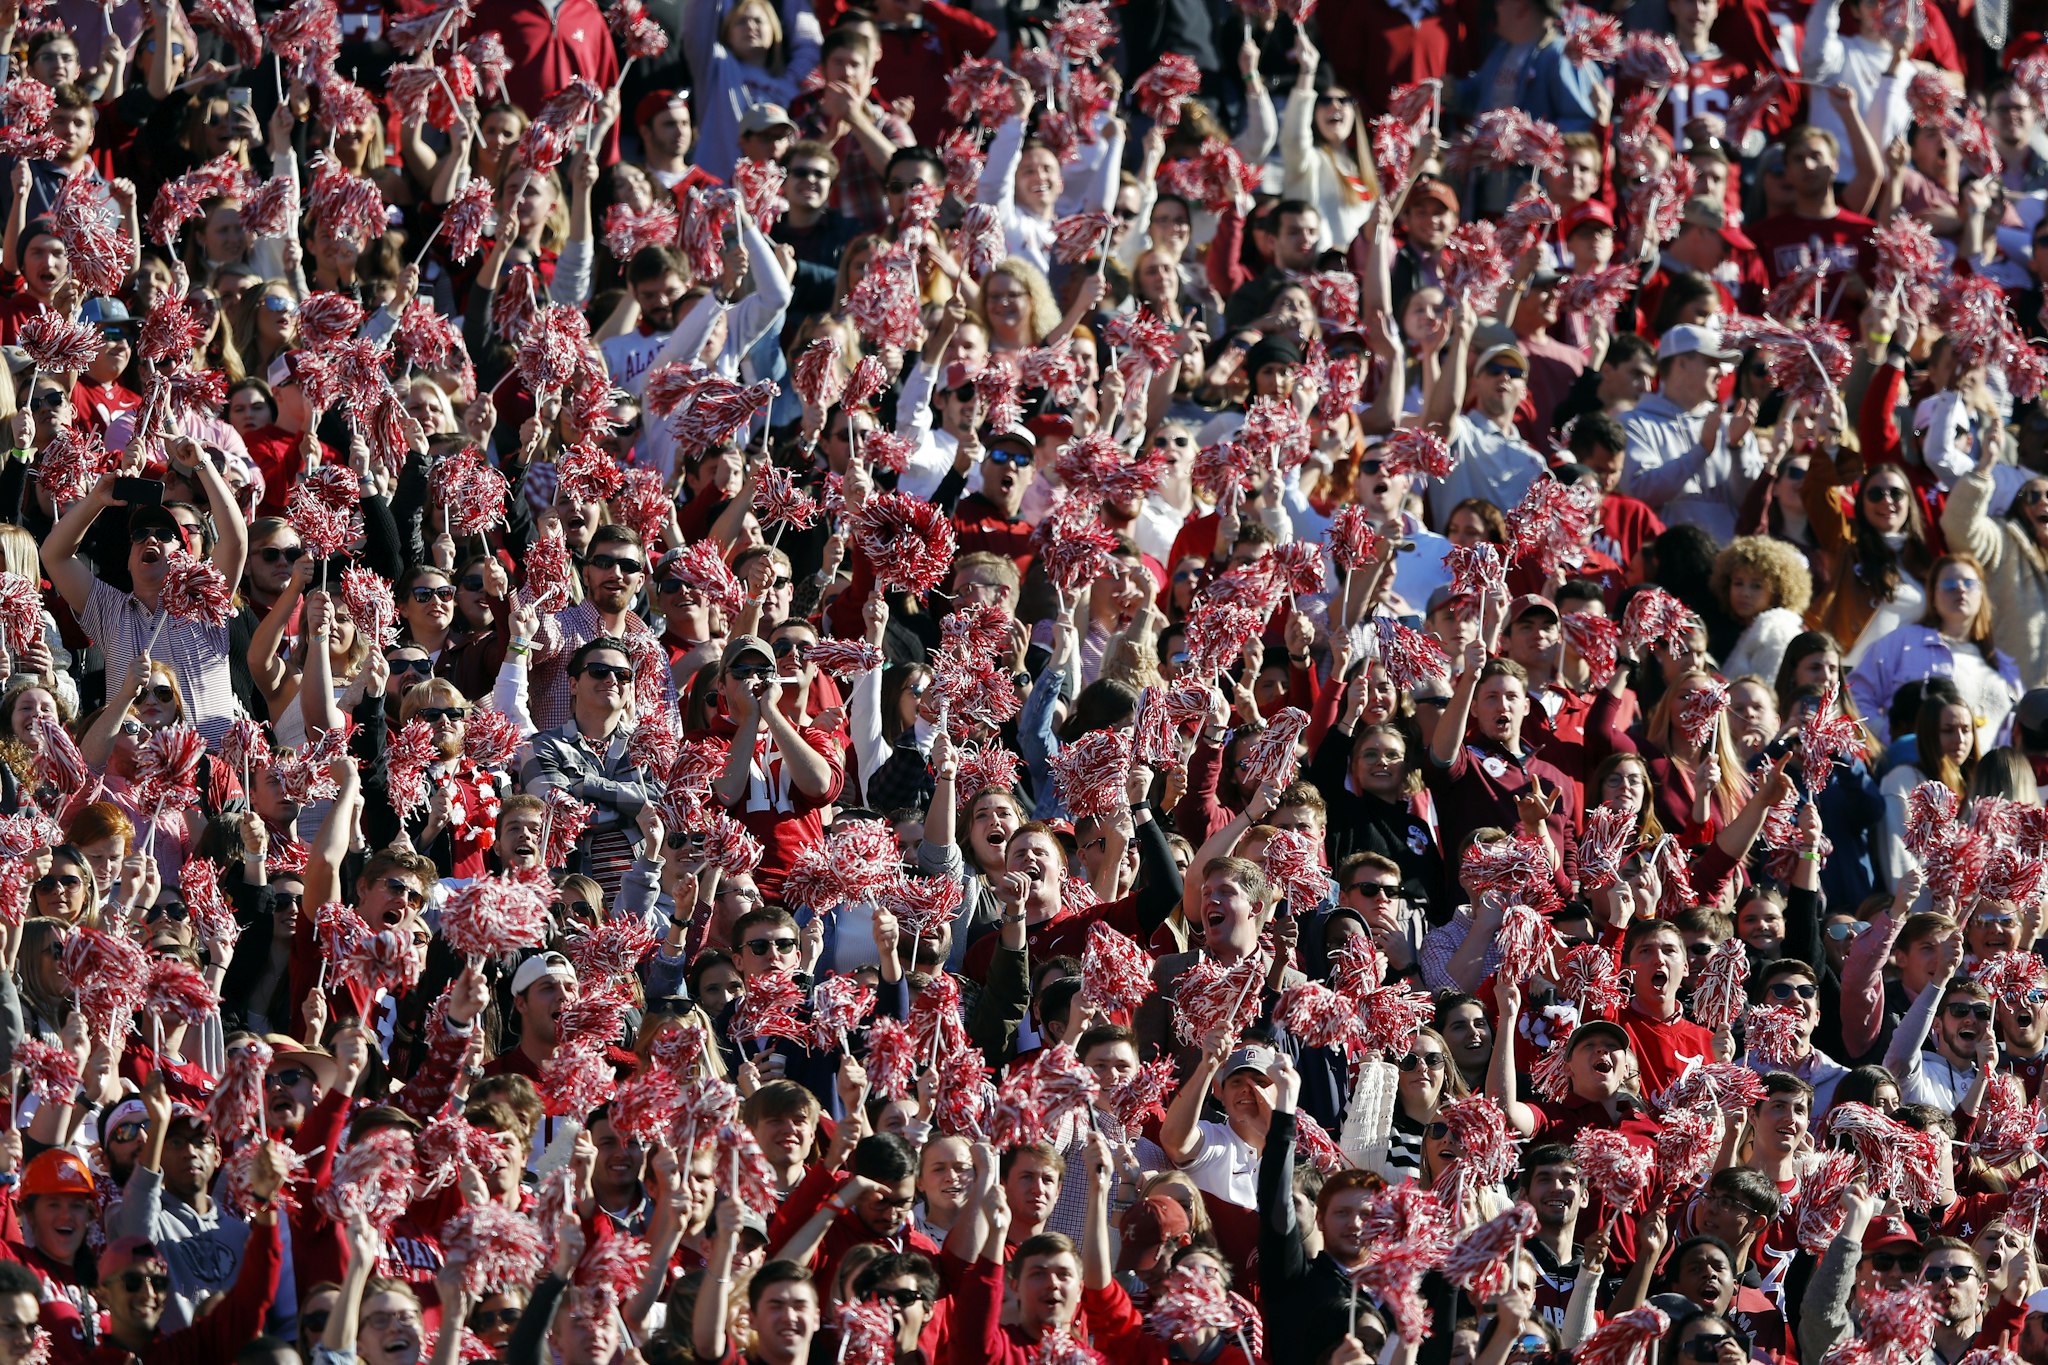 TUSCALOOSA, ALABAMA - NOVEMBER 09: A general view of fans before the game between the LSU Tigers and the Alabama Crimson Tide at Bryant-Denny Stadium on November 09, 2019 in Tuscaloosa, Alabama.